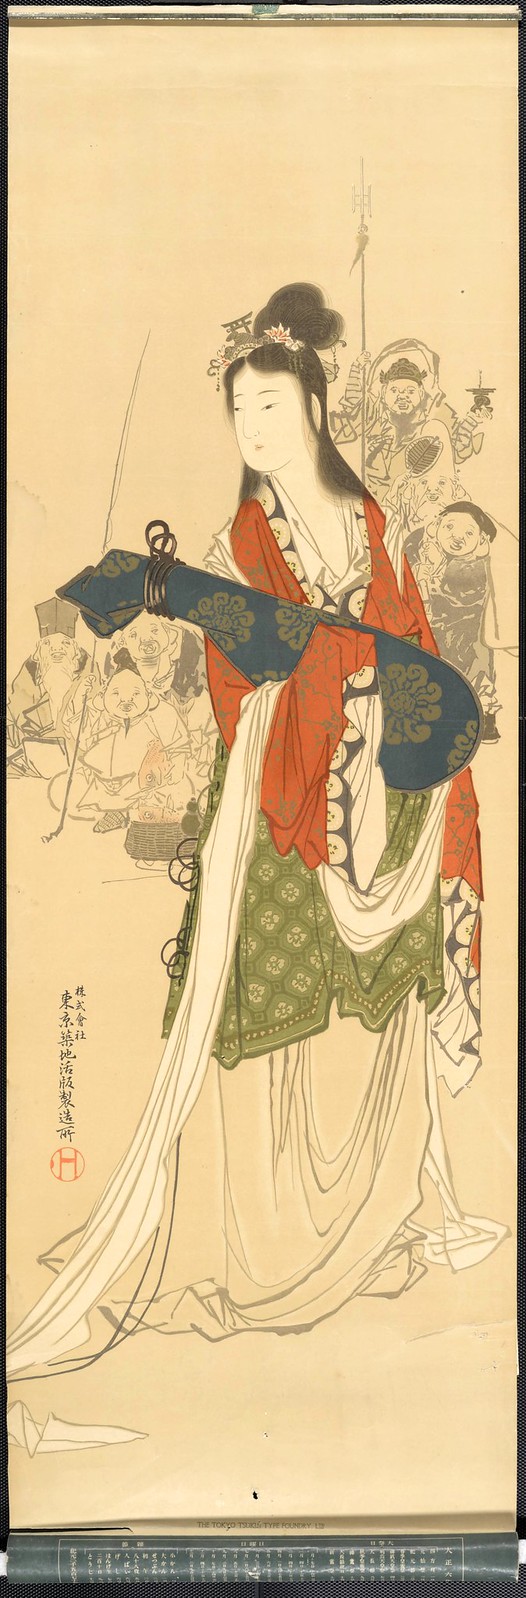 ukioy-e print in colour of woman in traditional Japanese costume walking, with small crowd behind watching her